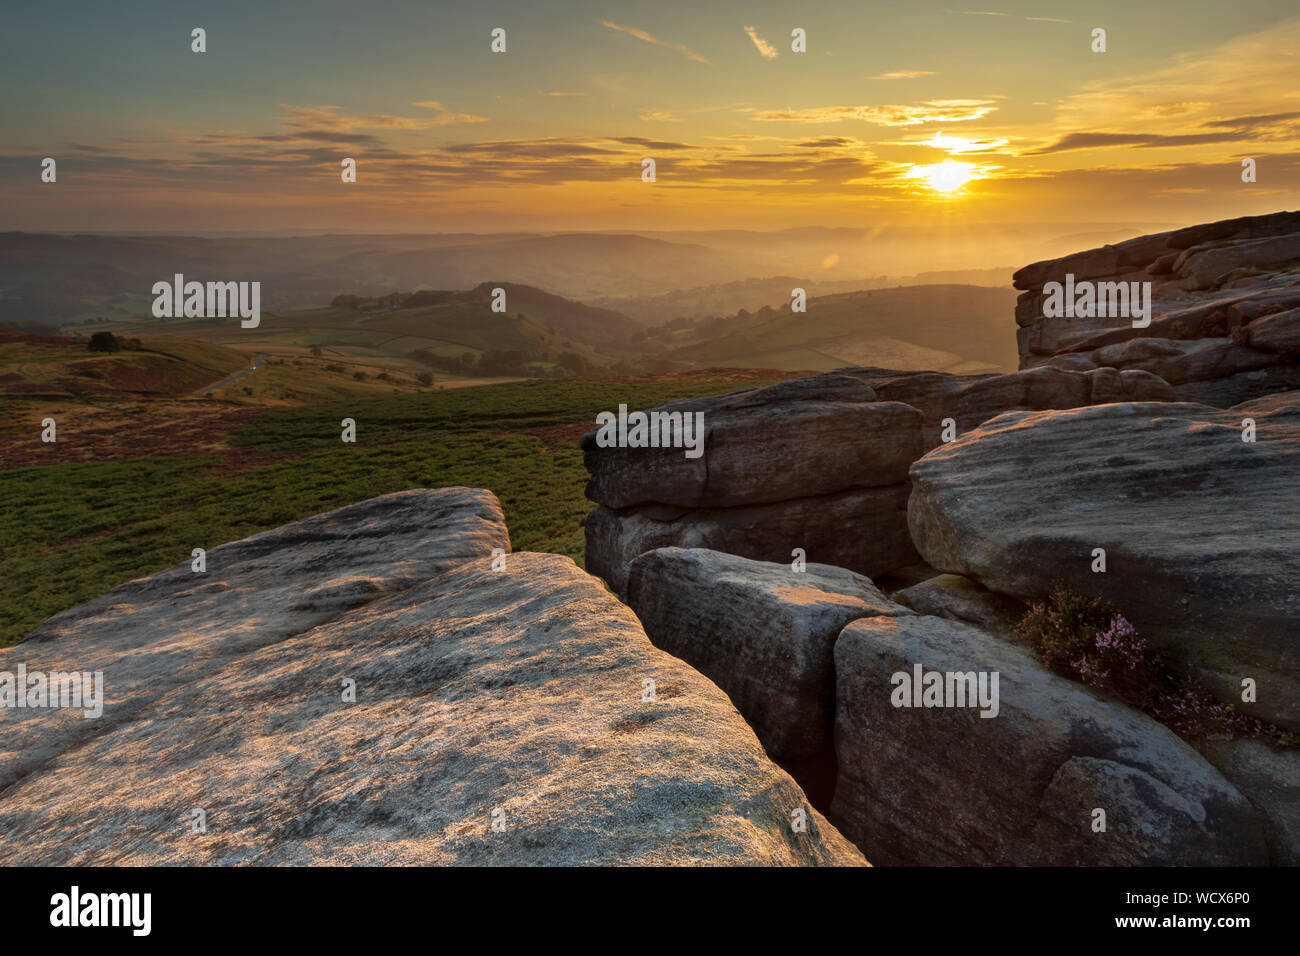 Sunset with setting sun on Higger Tor, Hathersage in the Peak District. This is a favourite destination for landscape photographer visitors . Stock Photo